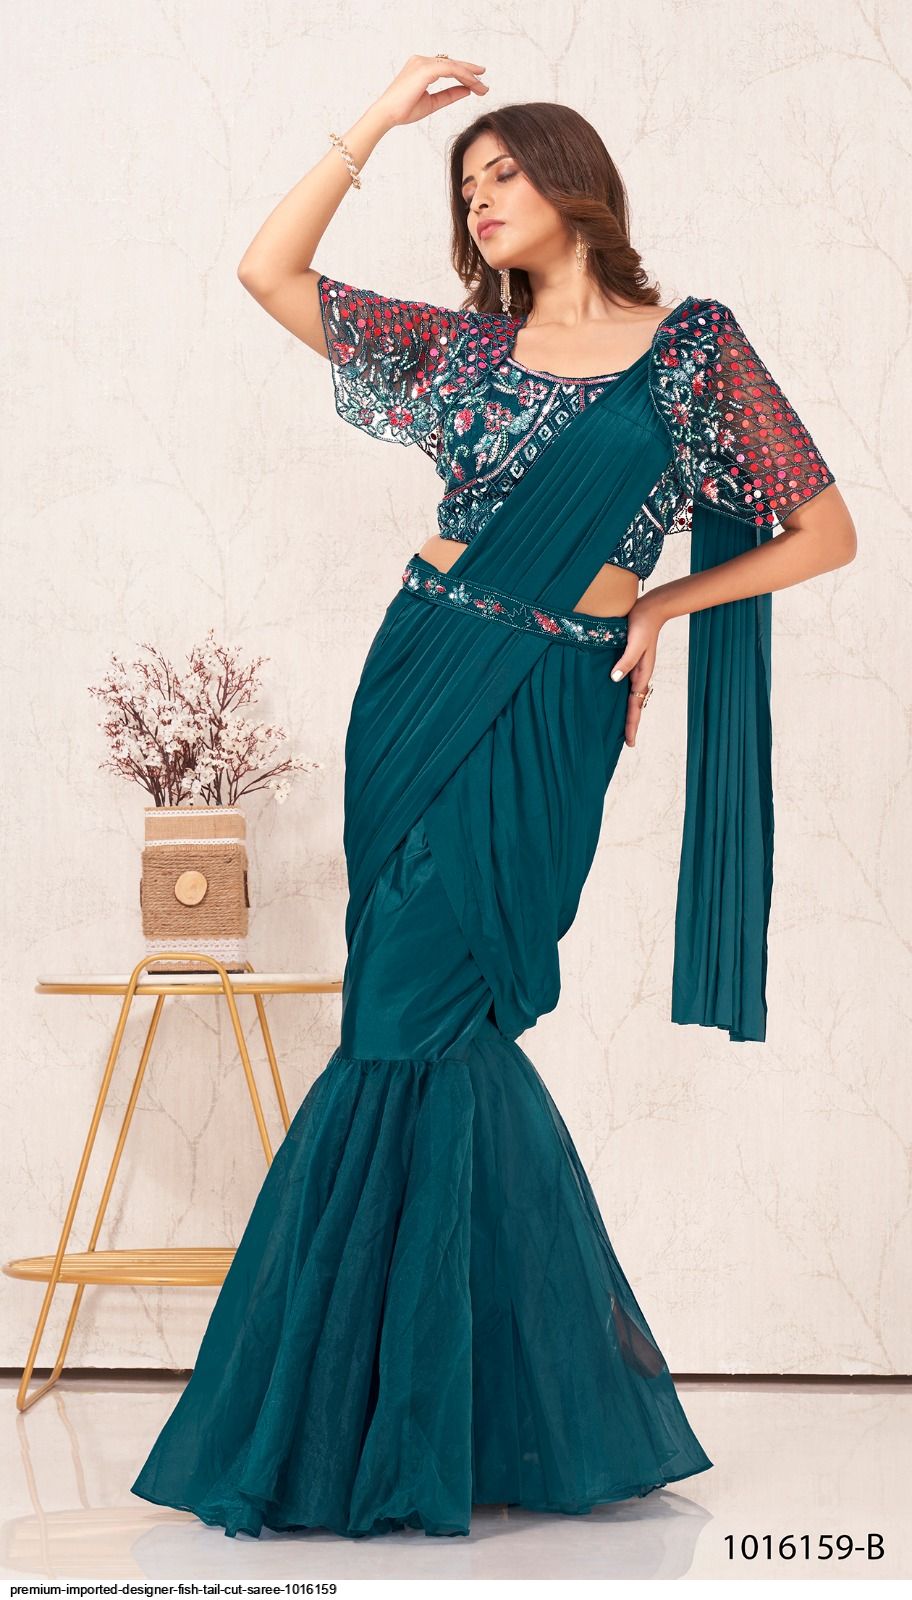 Explore Heavy Embroidered Work Blouses with Designer Sarees